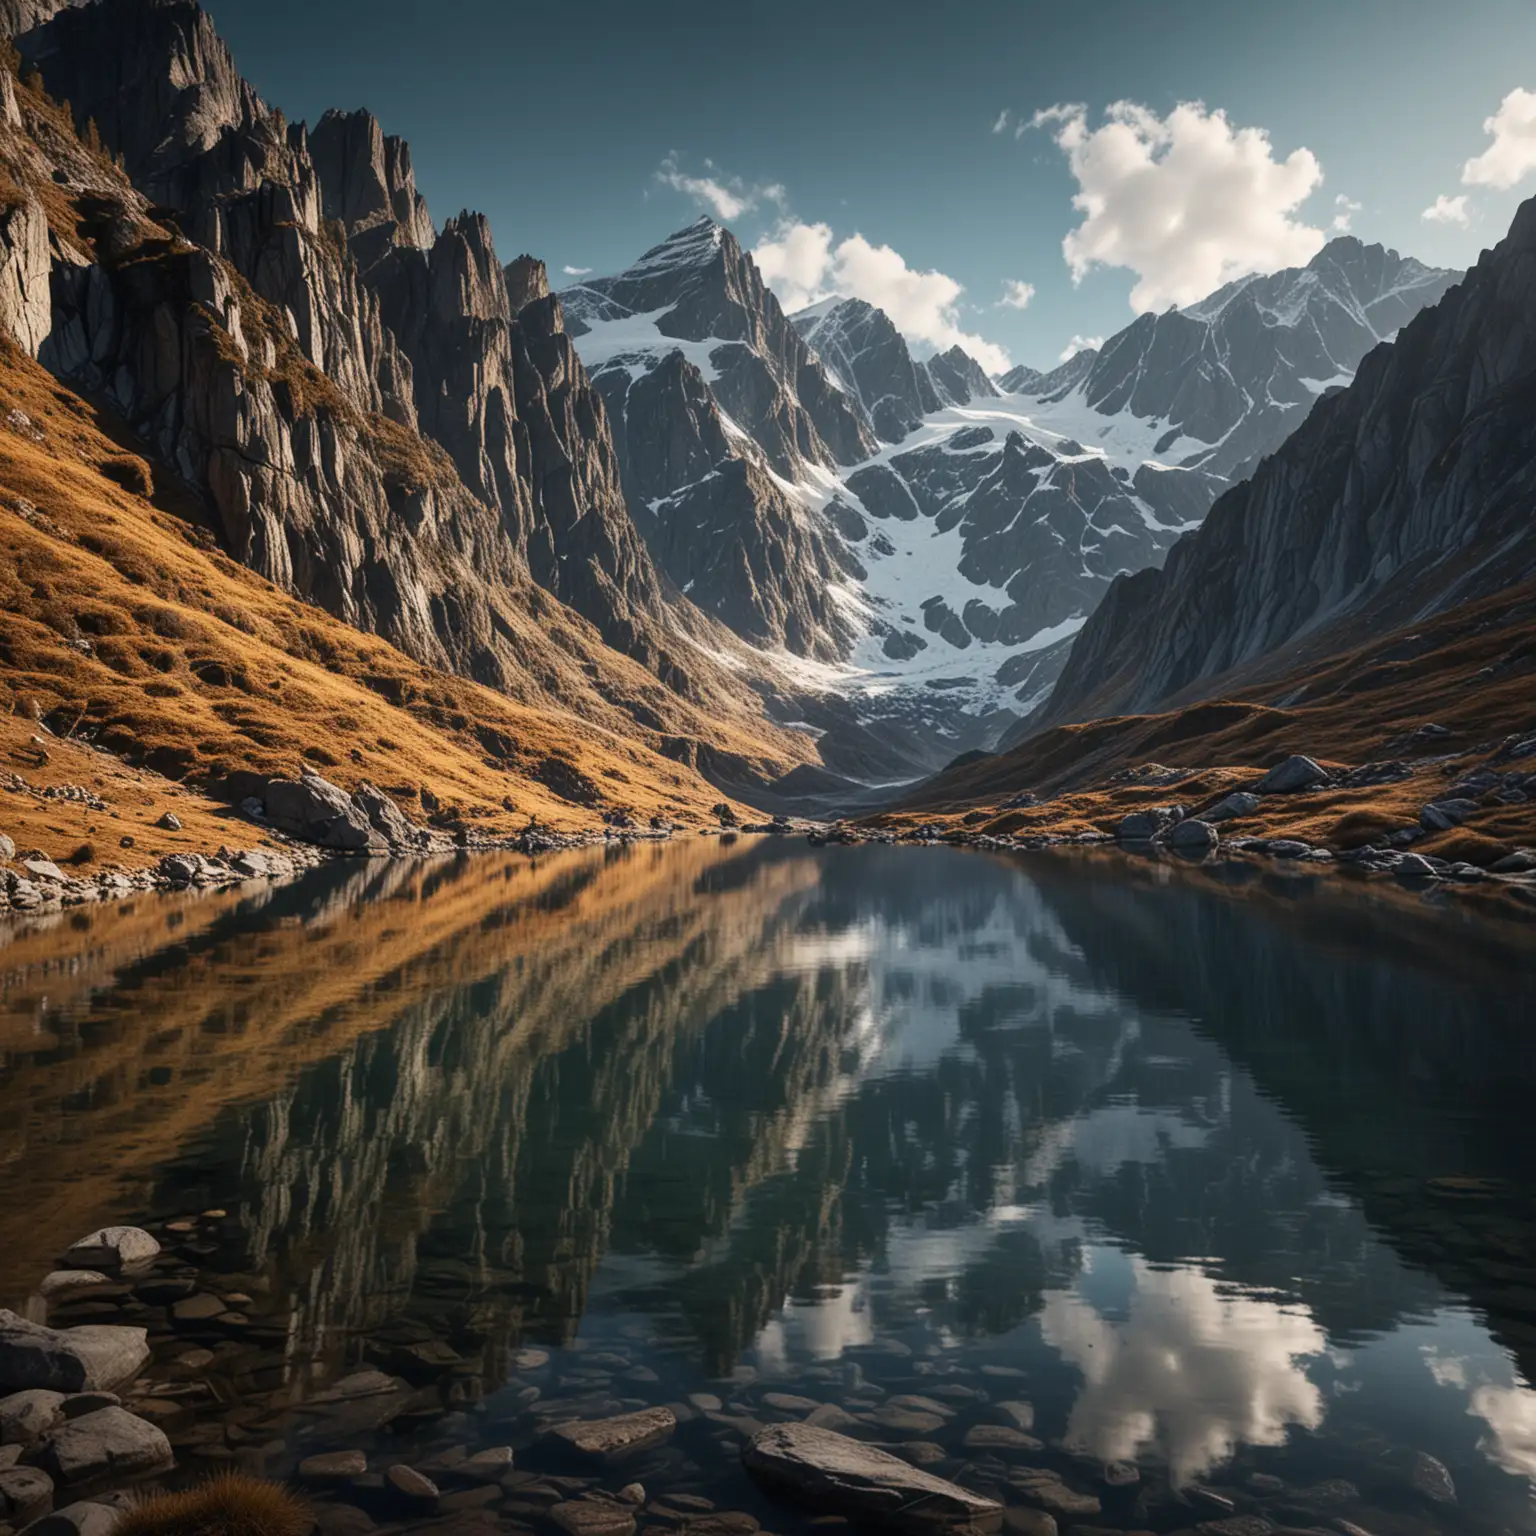 Immerse yourself in the breathtaking beauty of high mountains, captivated by the rich details and perfect composition of this high-quality, high-definition 8K shot of High mountains, rich details, perfect composition, high quality, high-definition, lake, reflections, photorealistic, nature photography